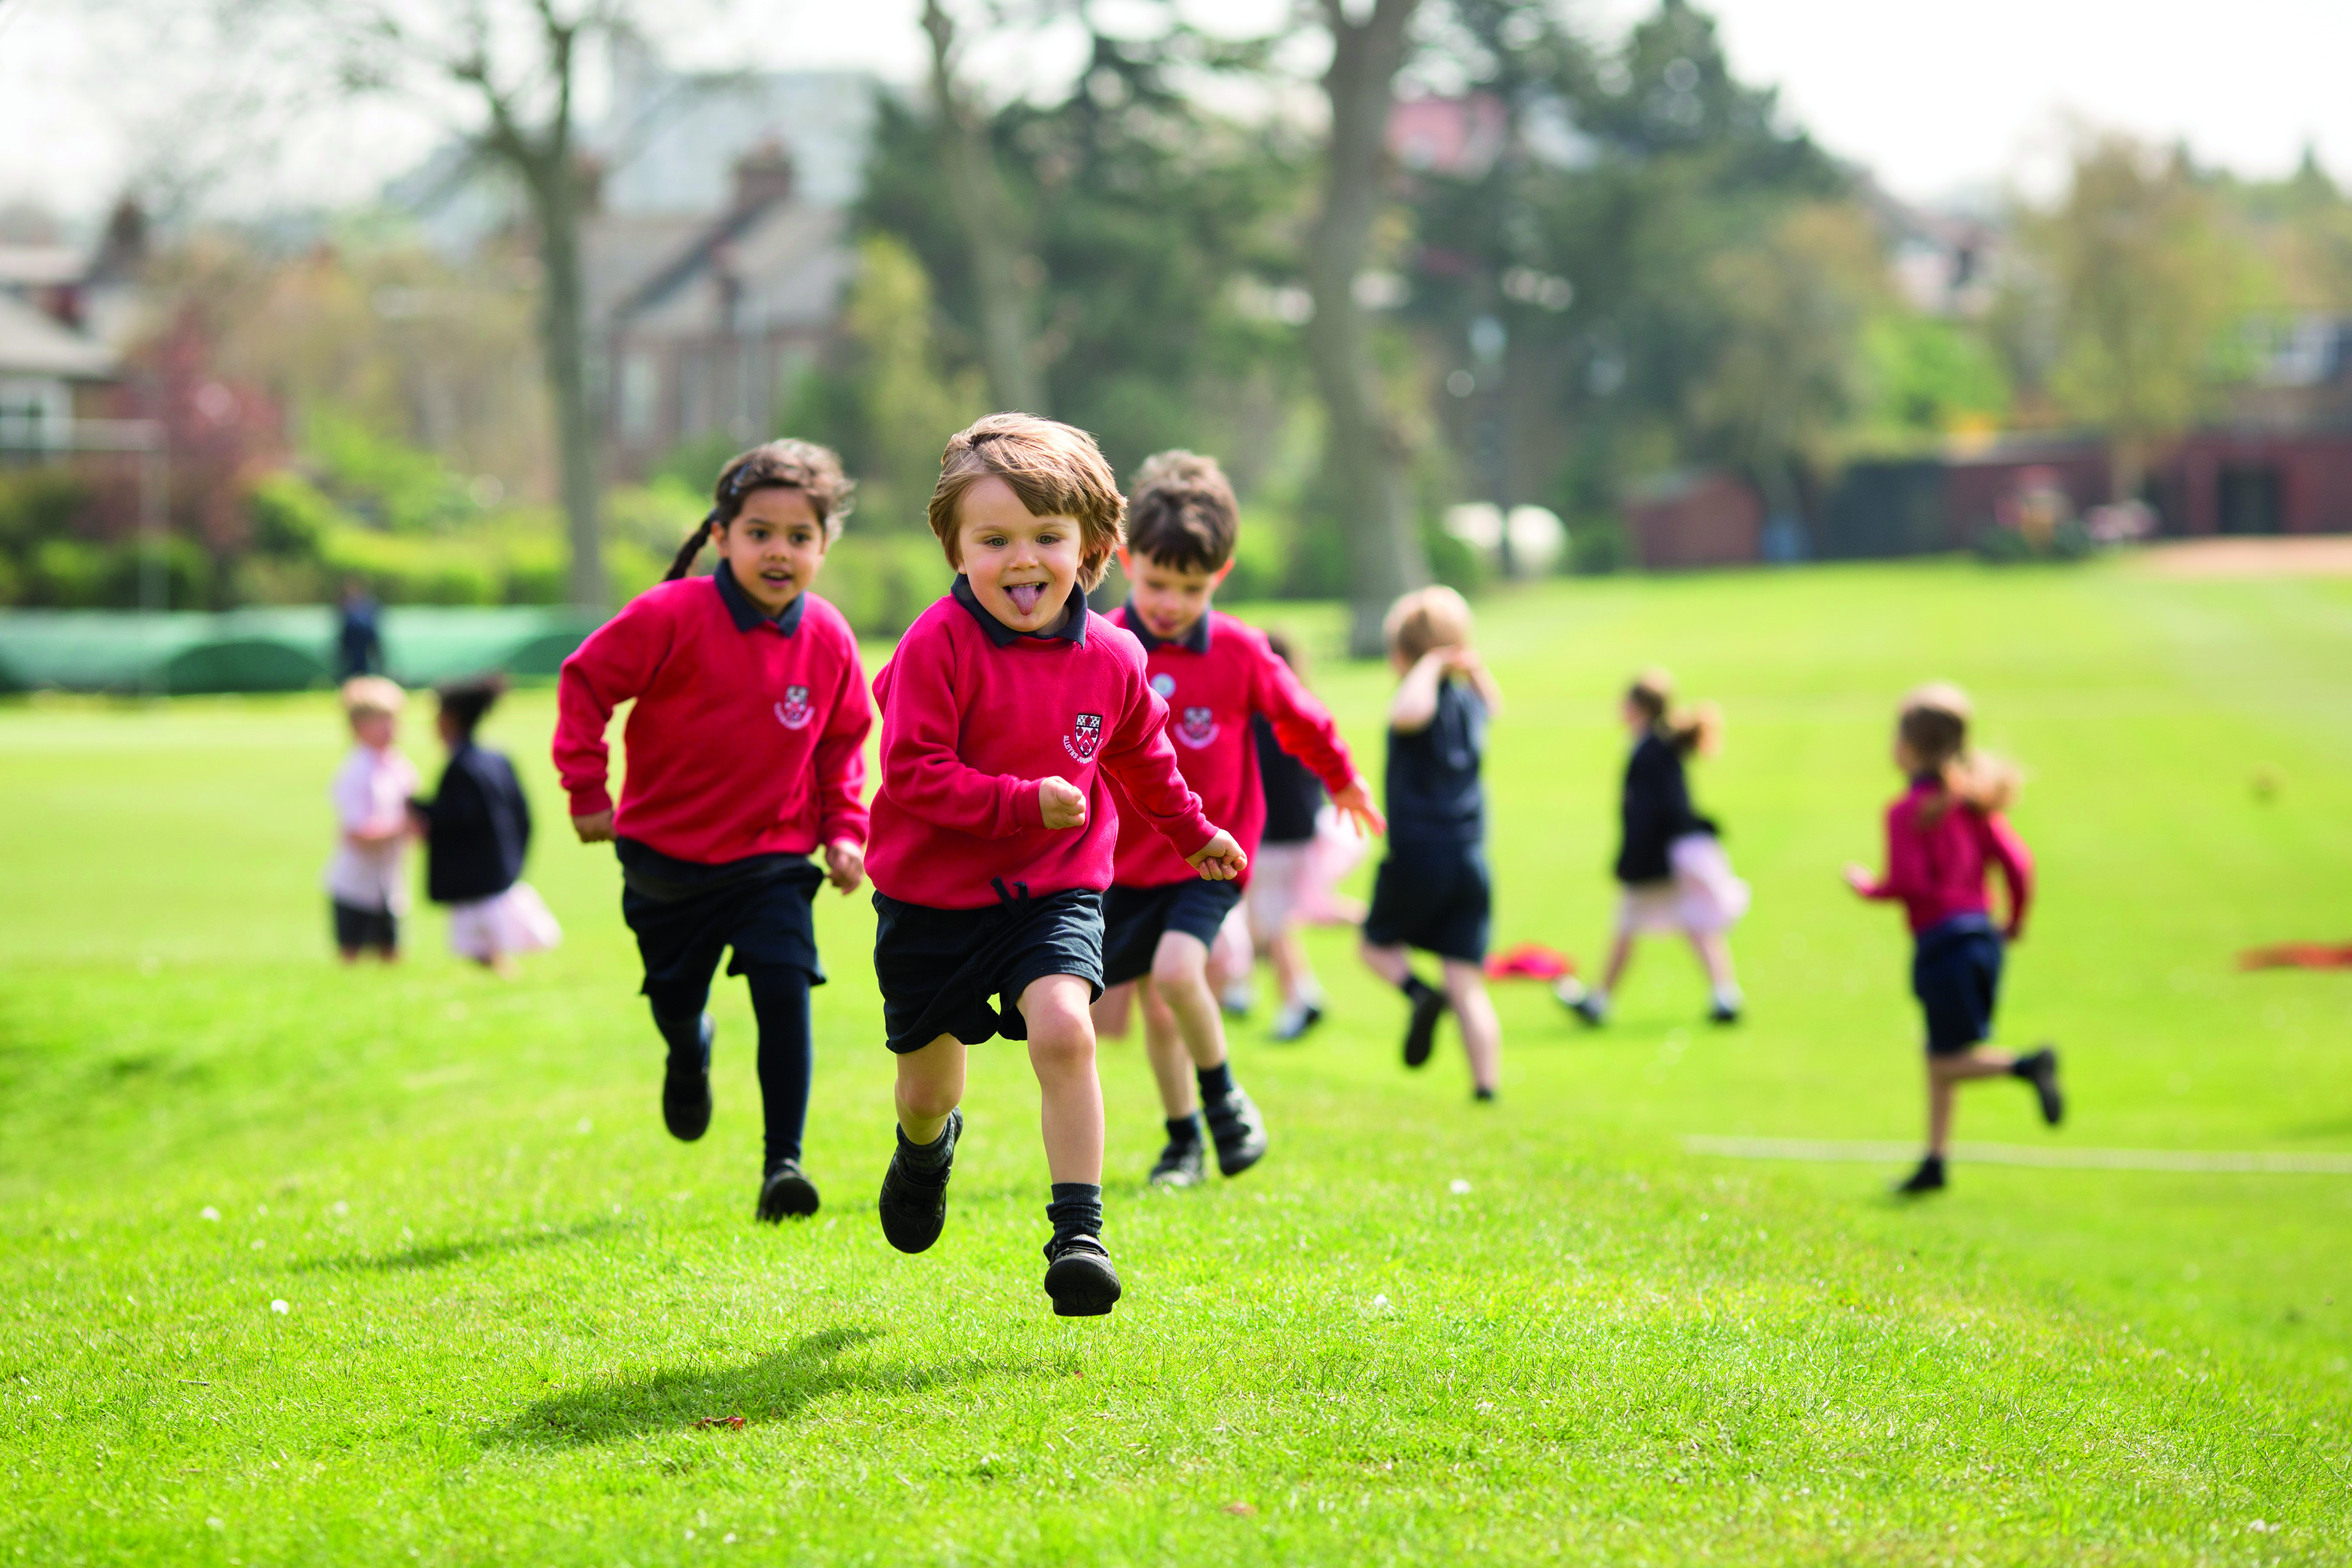 How to generate and sustain a love of sport in your child